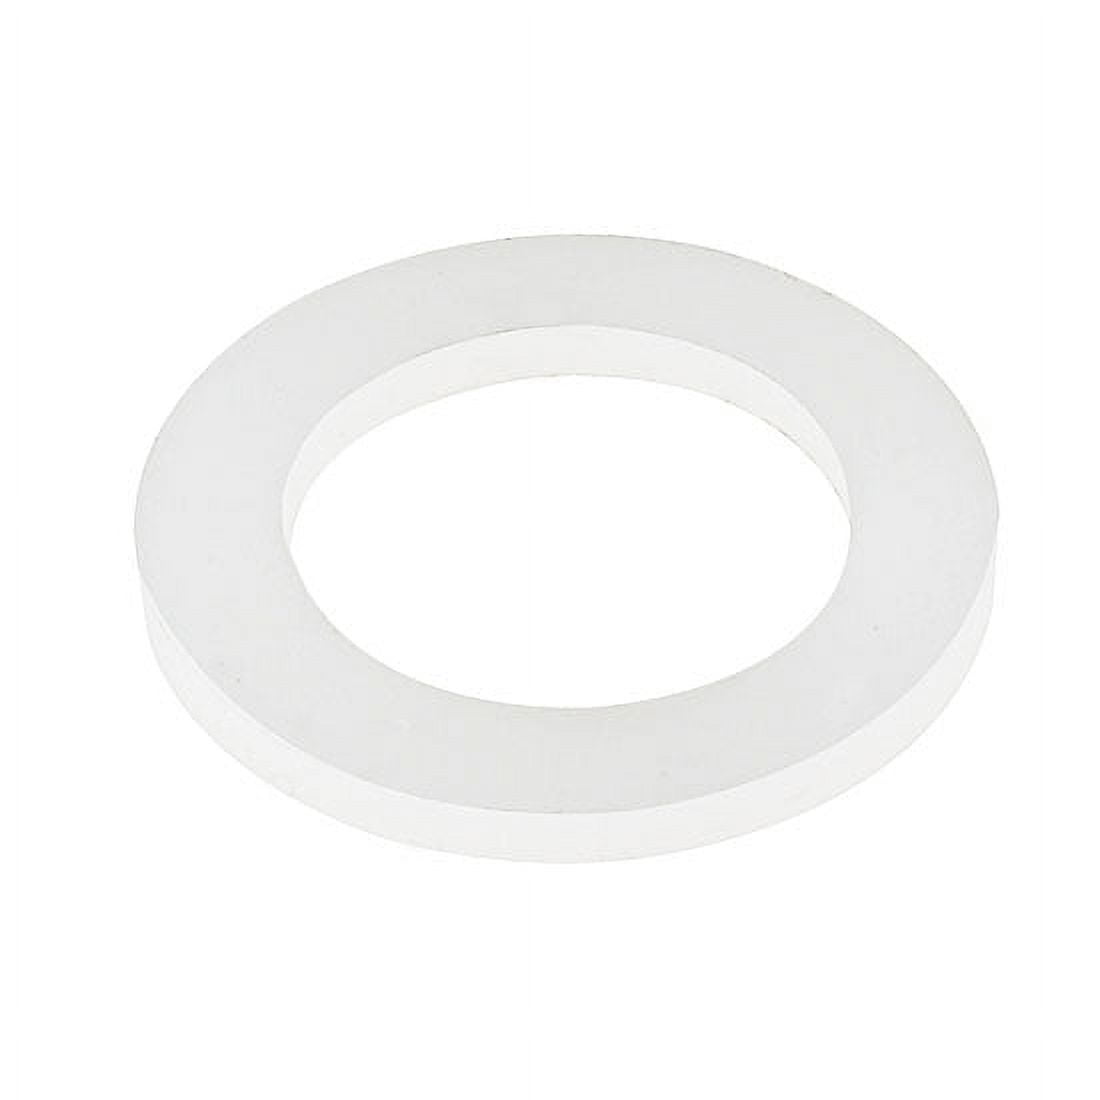 PTFE O-Rings Manufacturer, PTFE O-Rings Manufacturer Supplier | India